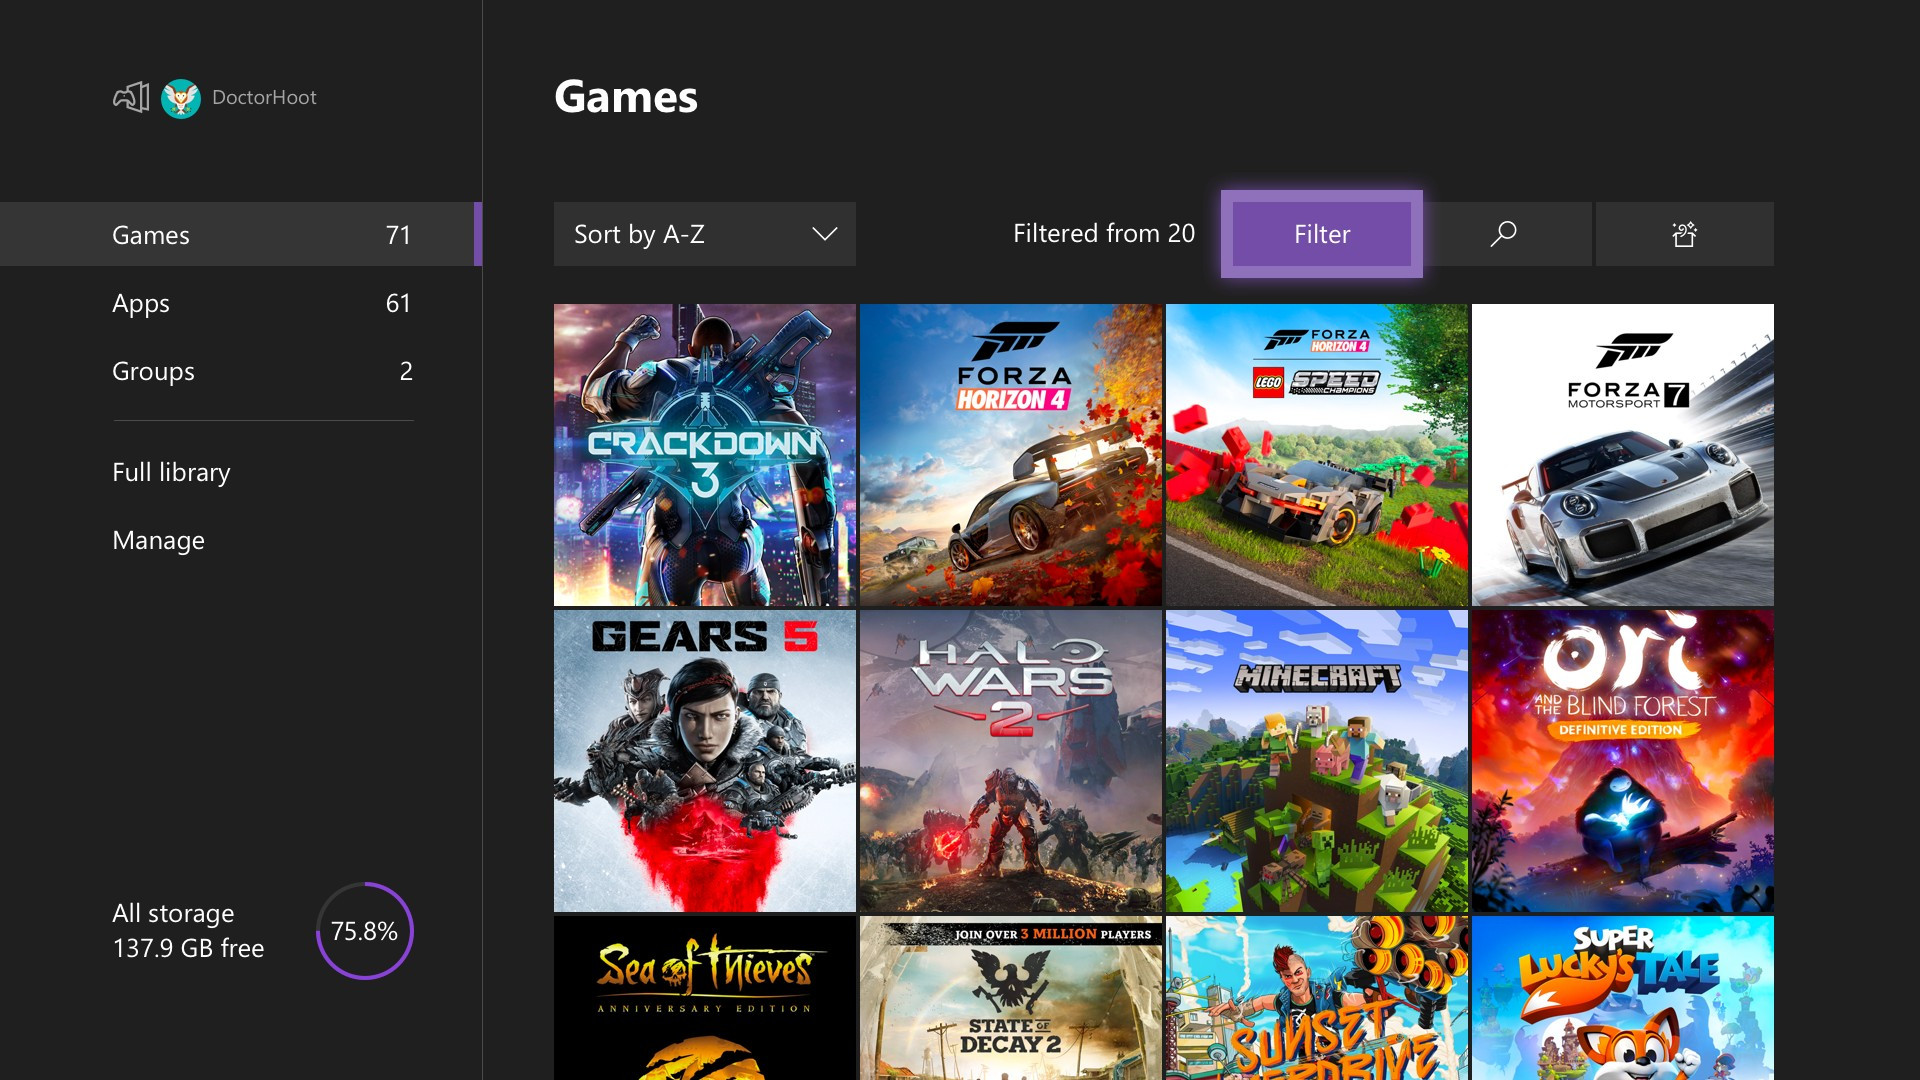 Xbox One May 2020 Update My games & apps new filters